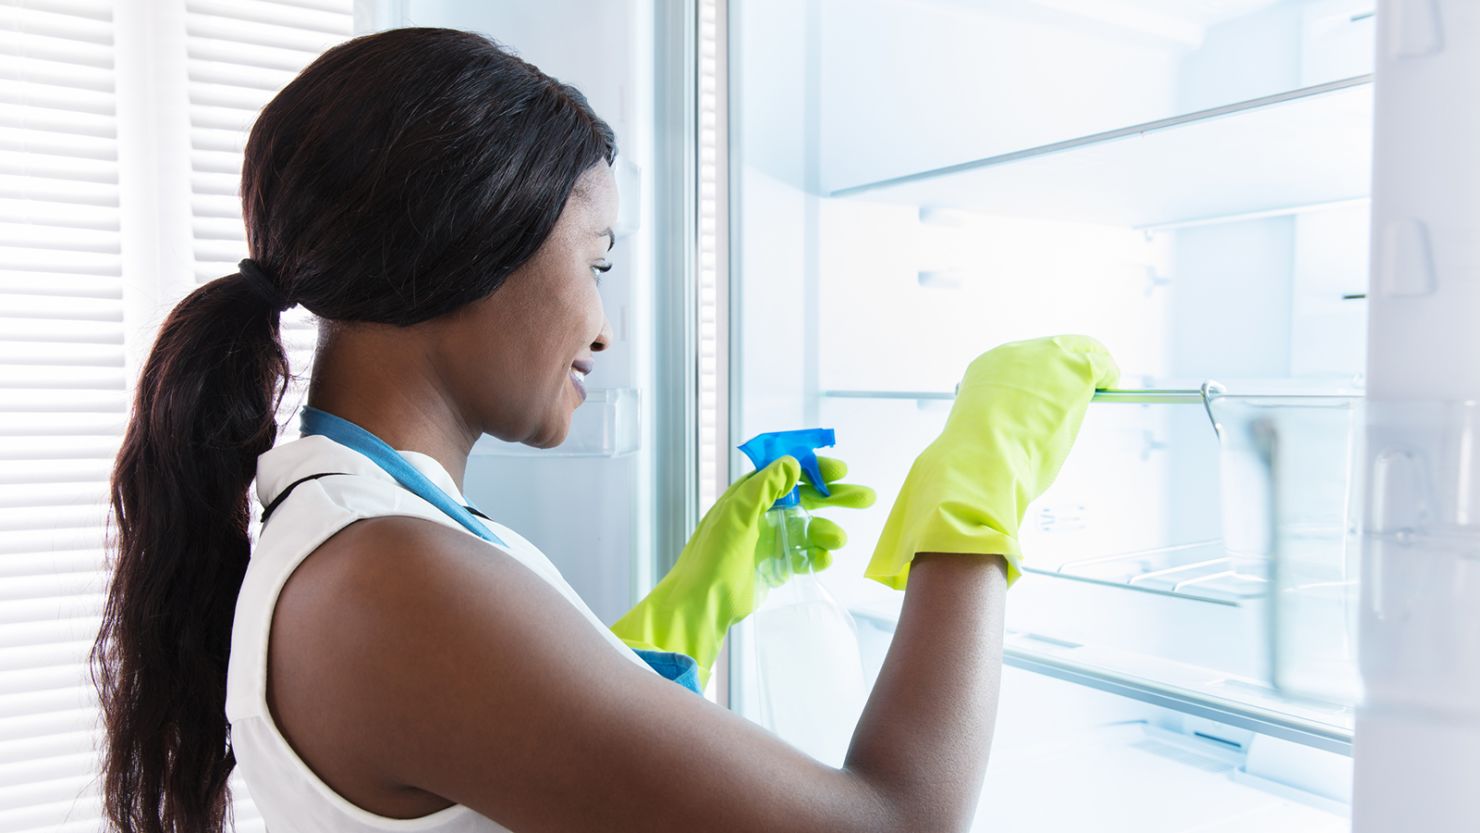 How to clean a refrigerator in 6 easy steps